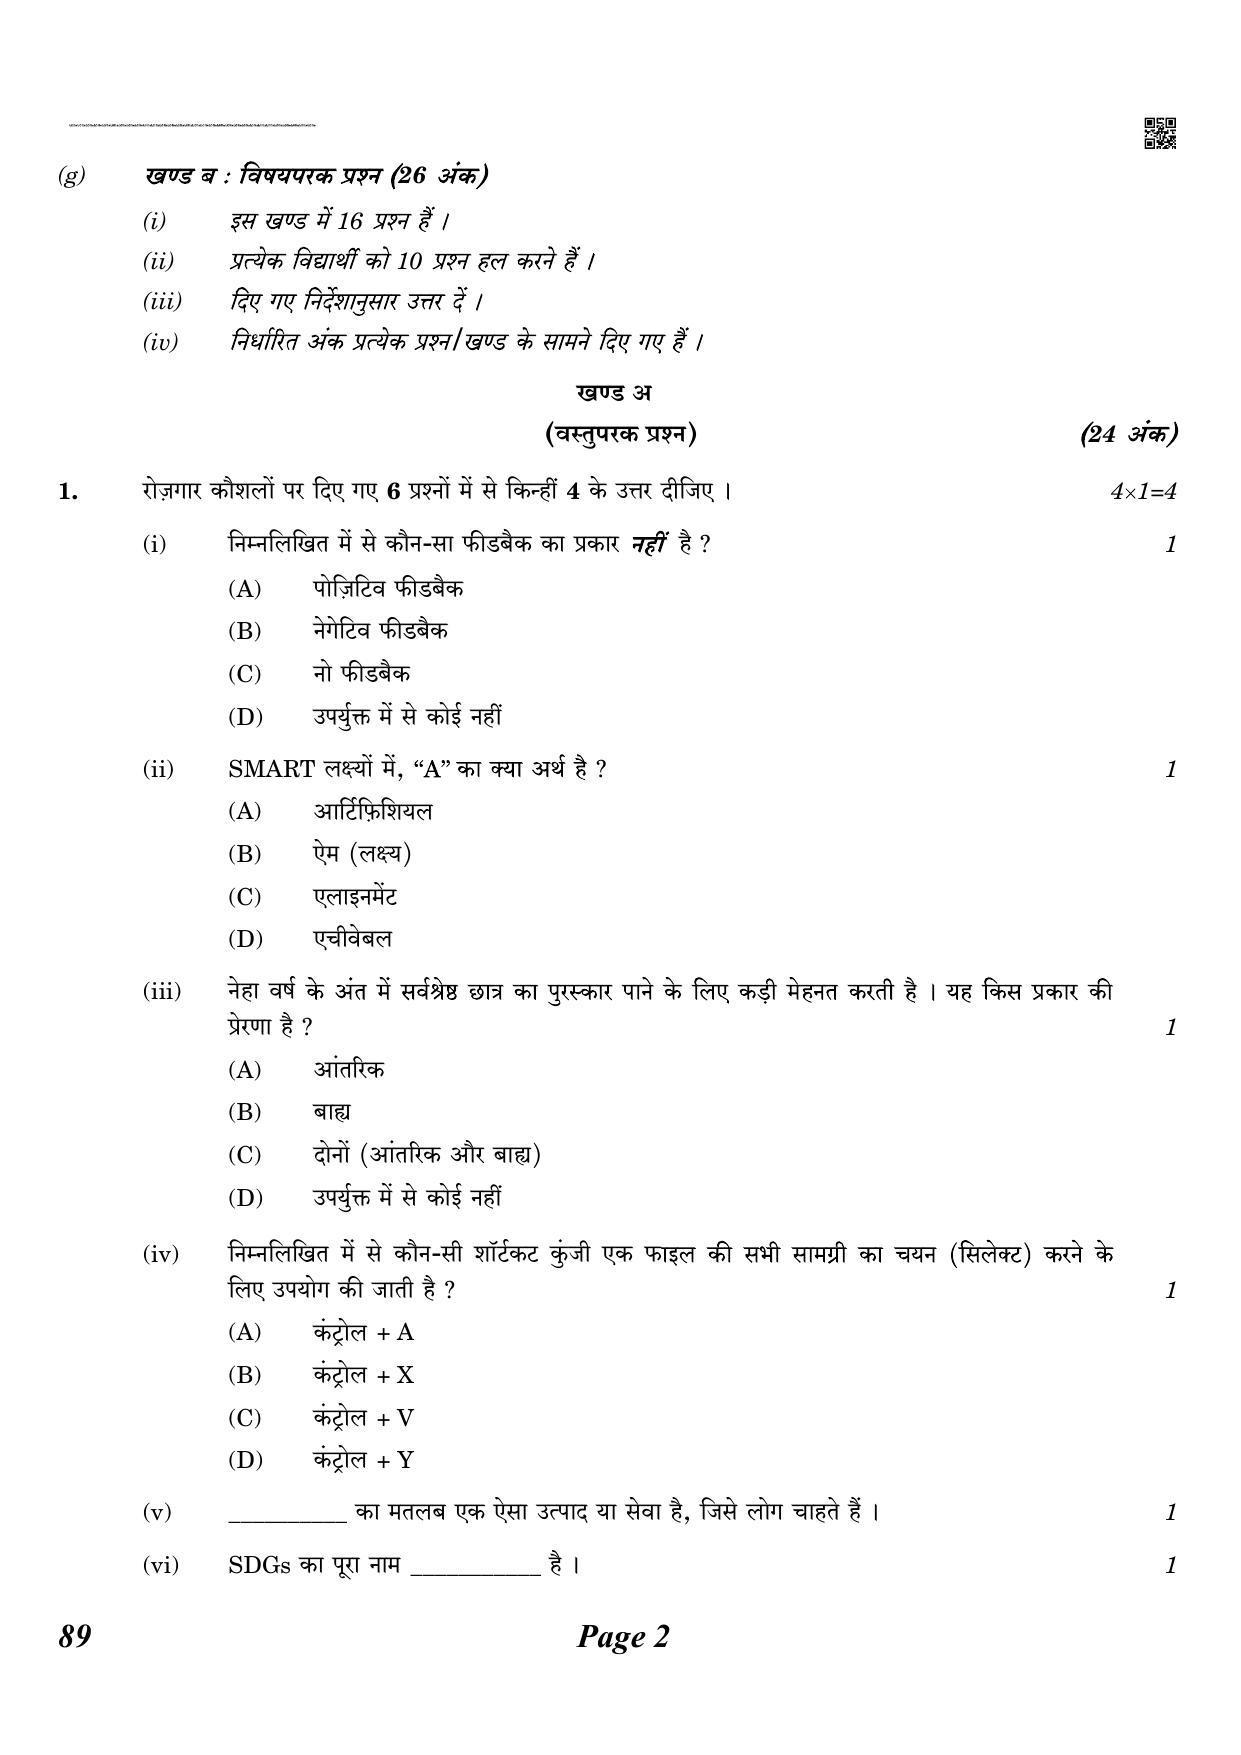 CBSE Class 10 QP_402_INFORMATION_TECH_HINDI 2021 Compartment Question Paper - Page 2